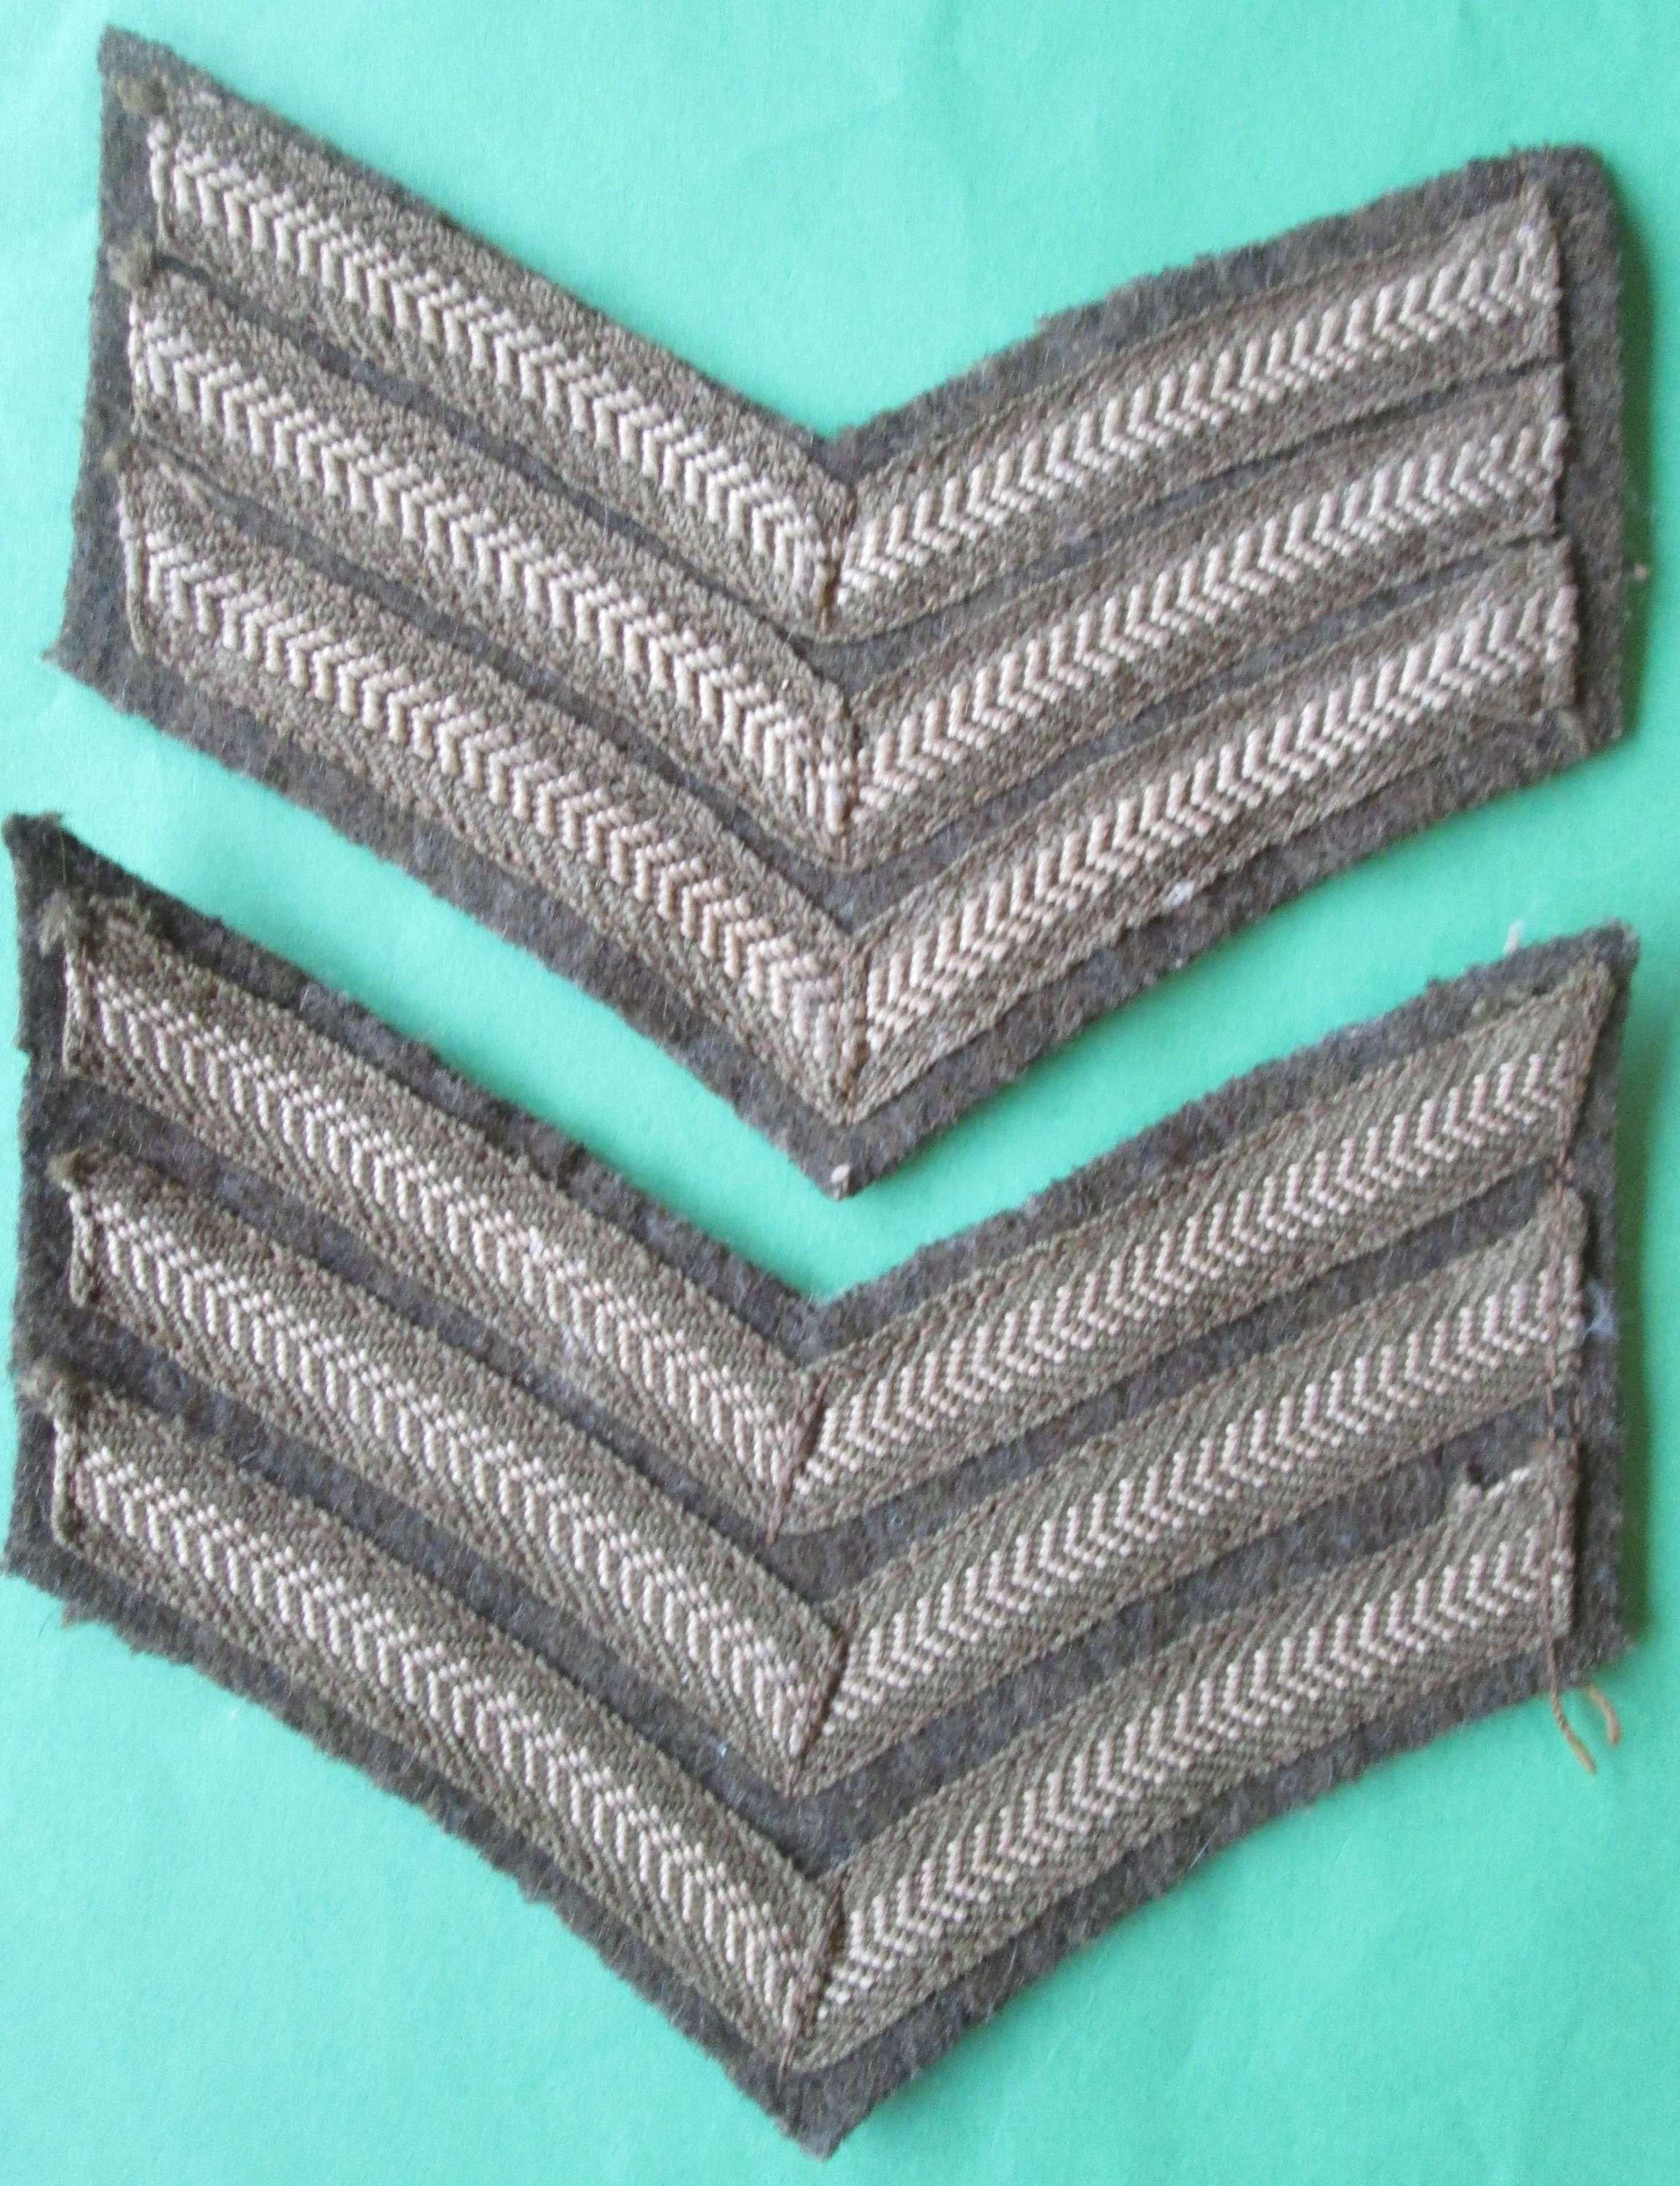 A PAIR OF SGTS STRIPES